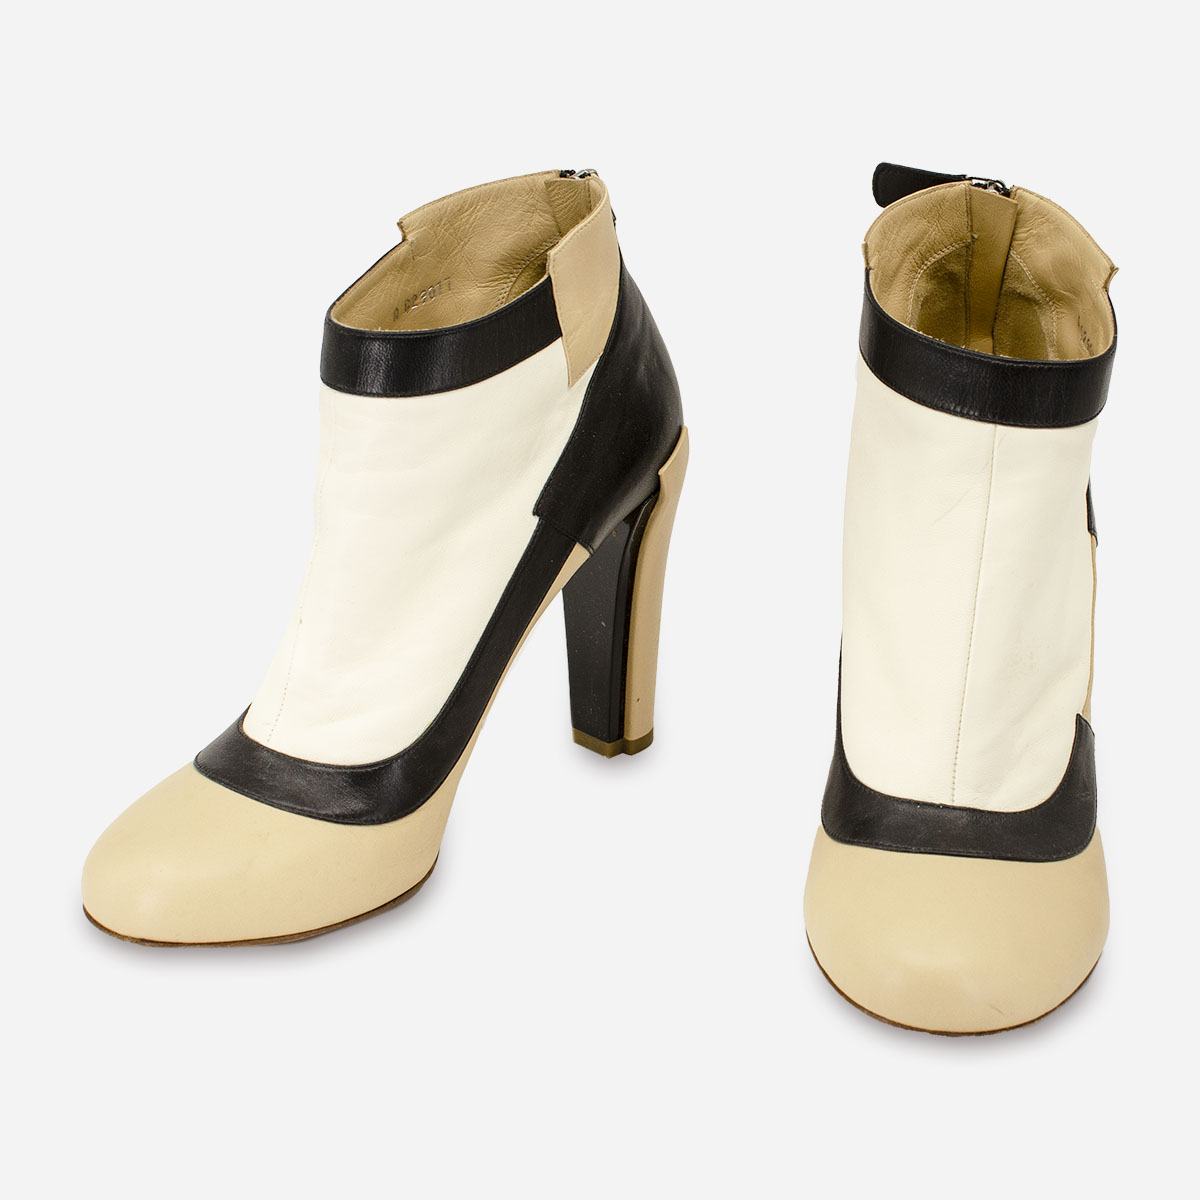 cream ankle boots, Black ankle boots, tan ankle boots